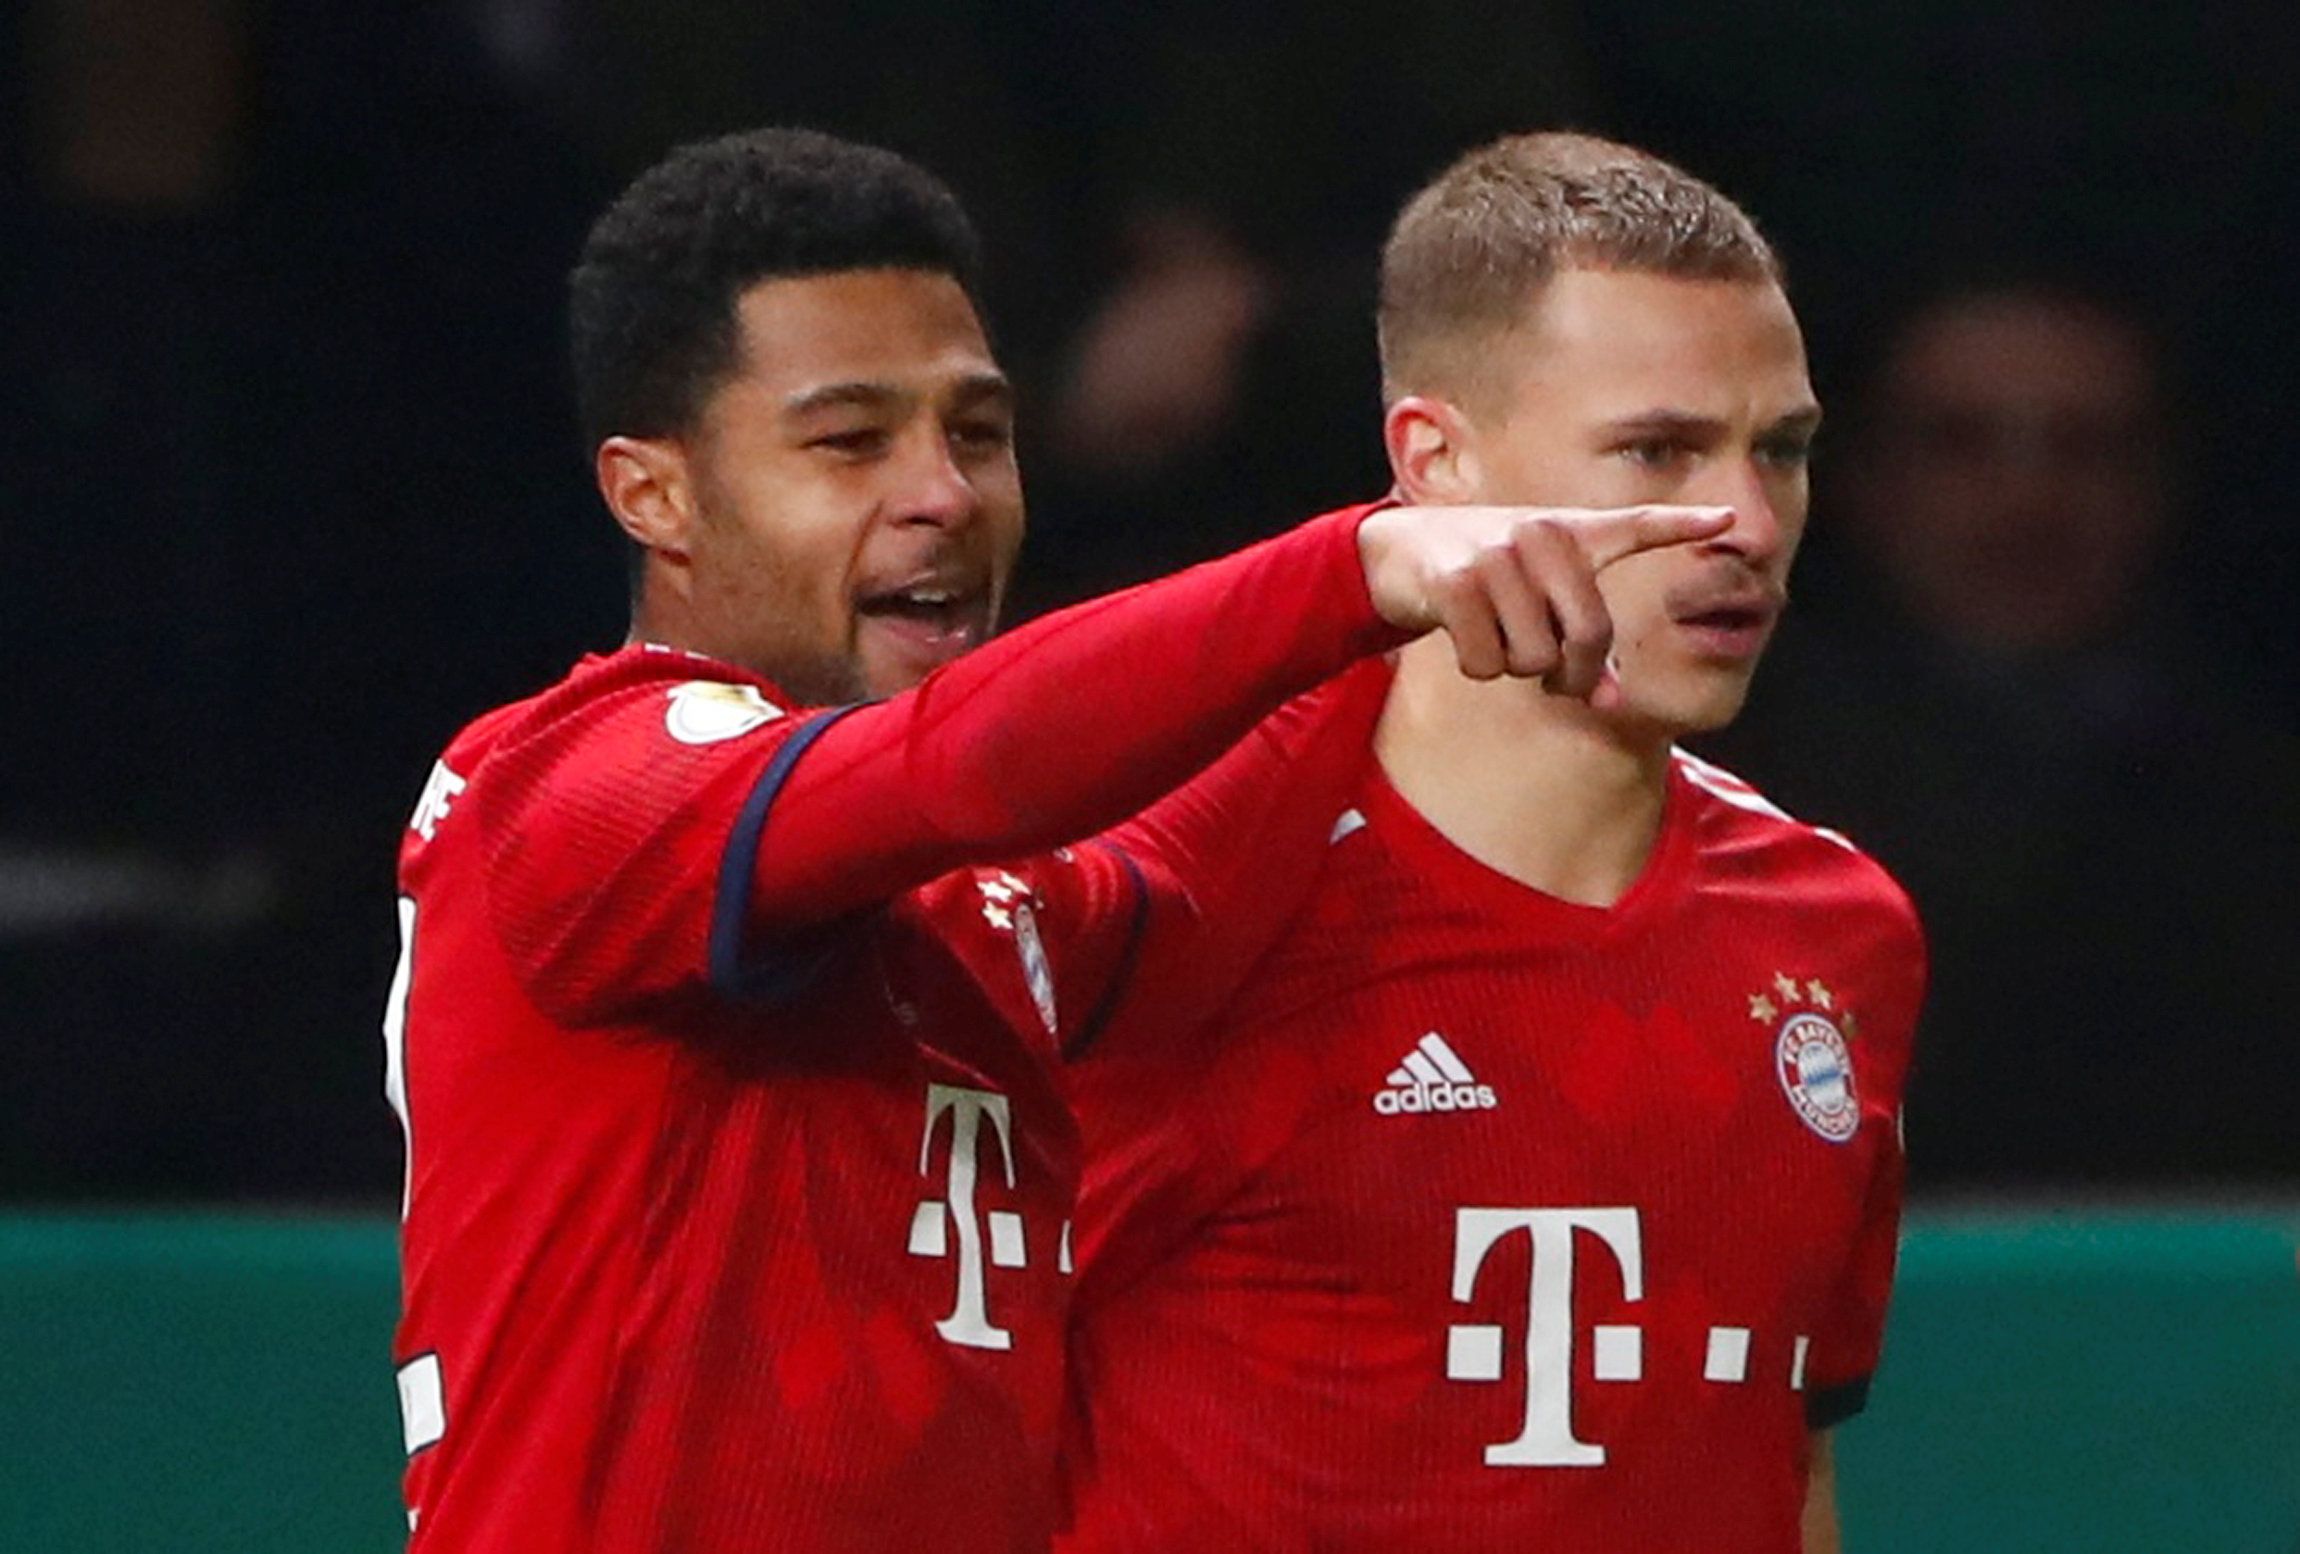 Soccer Football - DFB Cup - Third Round - Hertha BSC v Bayern Munich - Olympiastadion, Berlin, Germany - February 6, 2019  Bayern Munich's Serge Gnabry celebrates scoring their second goal with Joshua Kimmich   REUTERS/Hannibal Hanschke  DFB regulations prohibit any use of photographs as image sequences and/or quasi-video